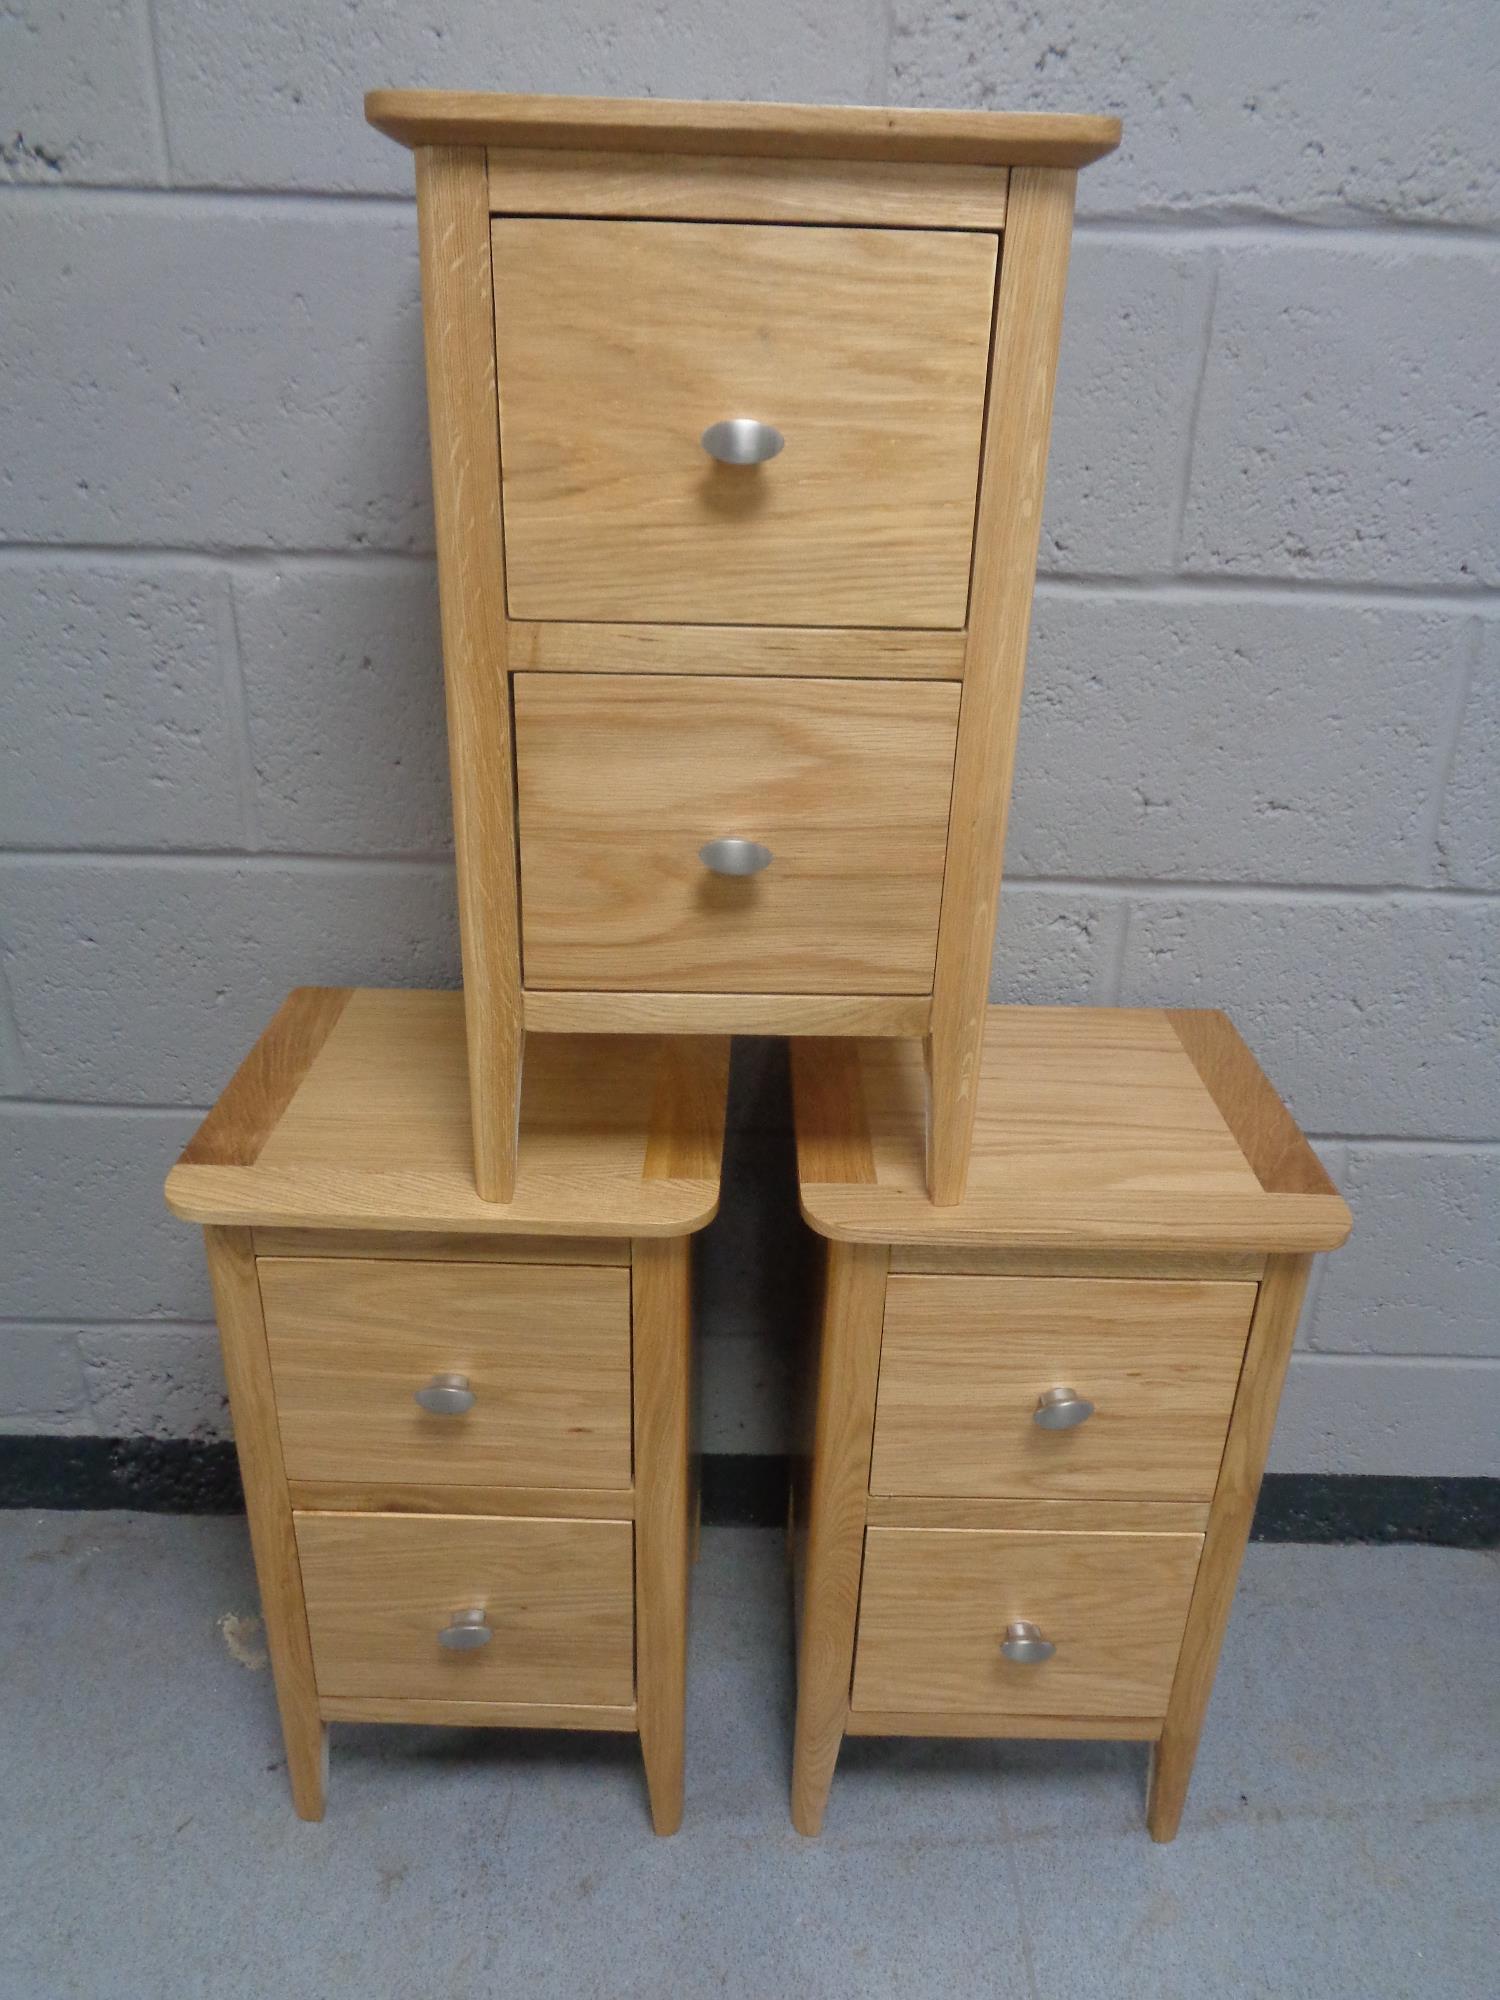 A set of three contemporary two drawer bedside stands in an oak finish